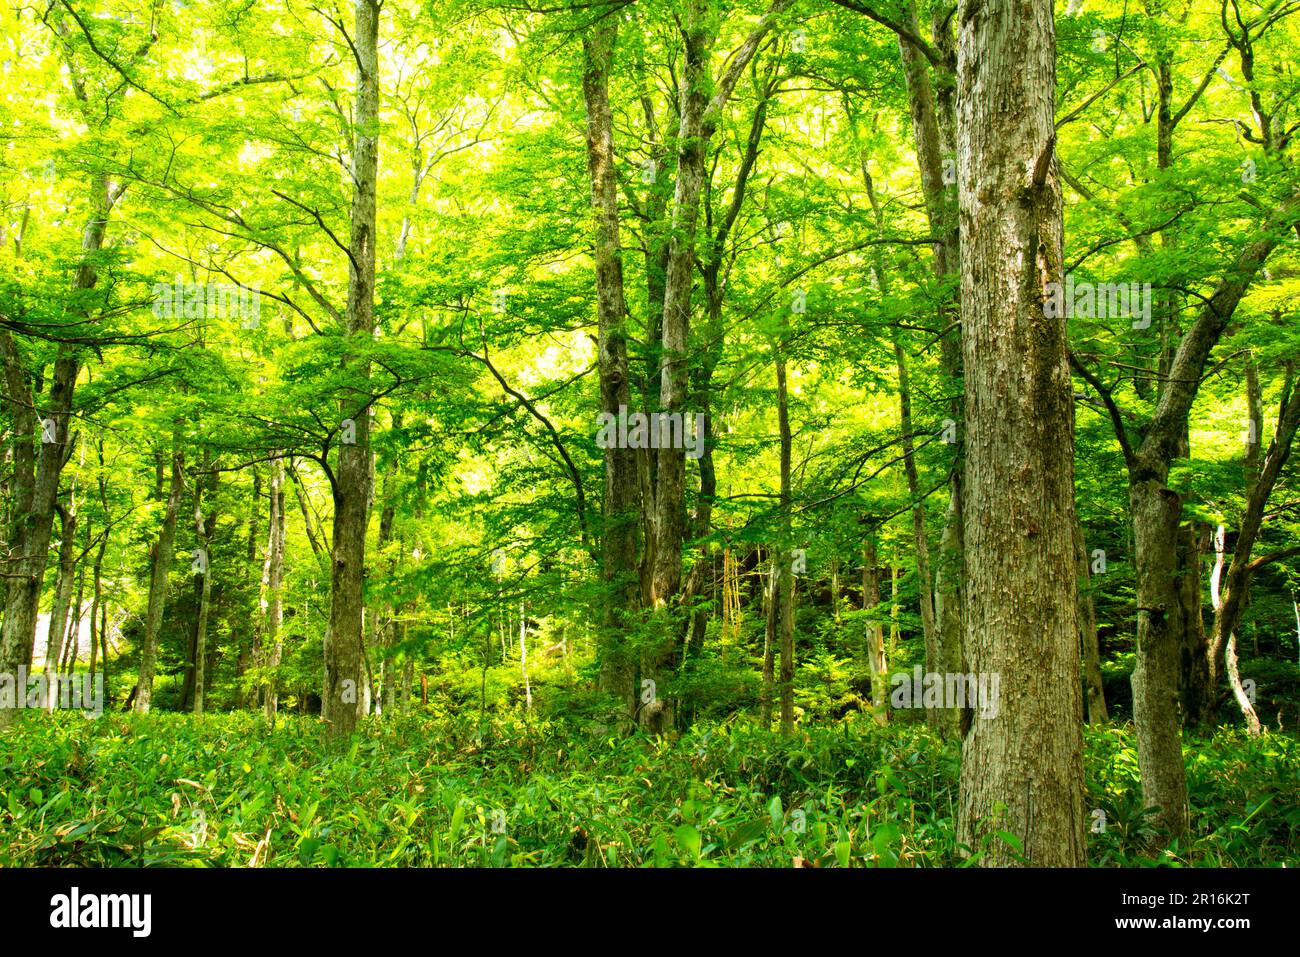 Primeval forest with frsh leaves, Kamikochi Stock Photo